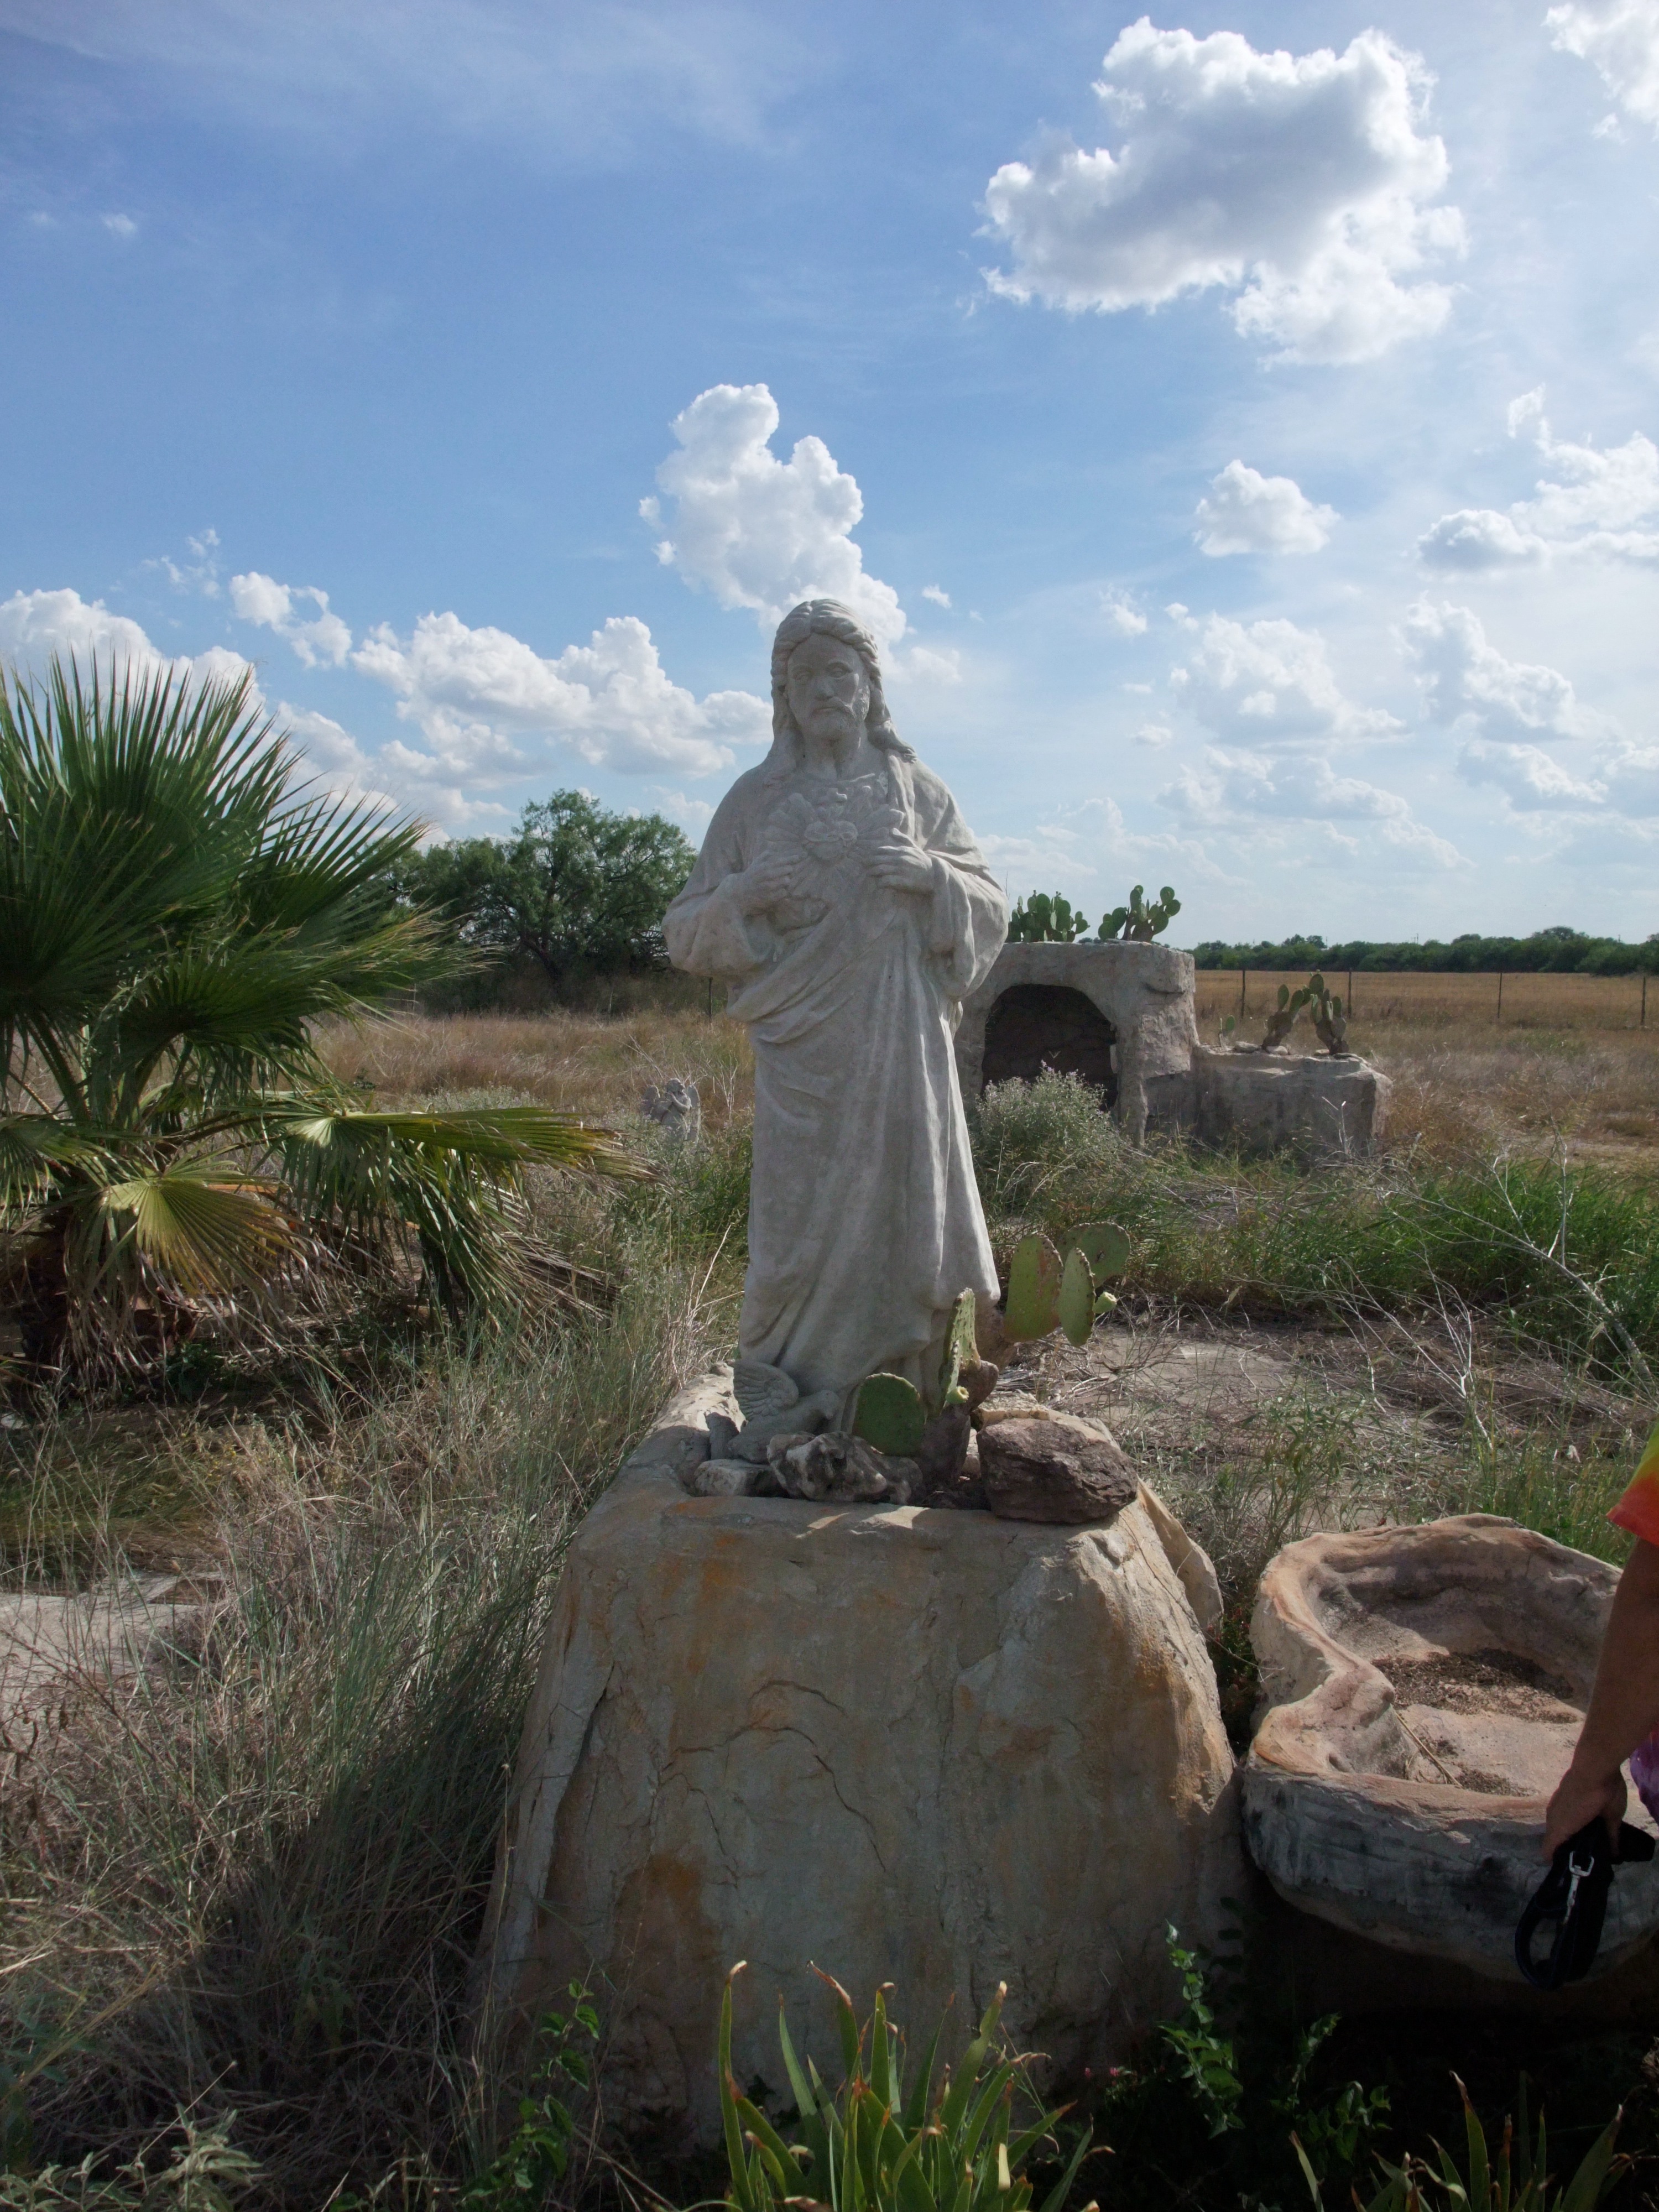 Uvalde Bible Land (I did the cement work, not the figures